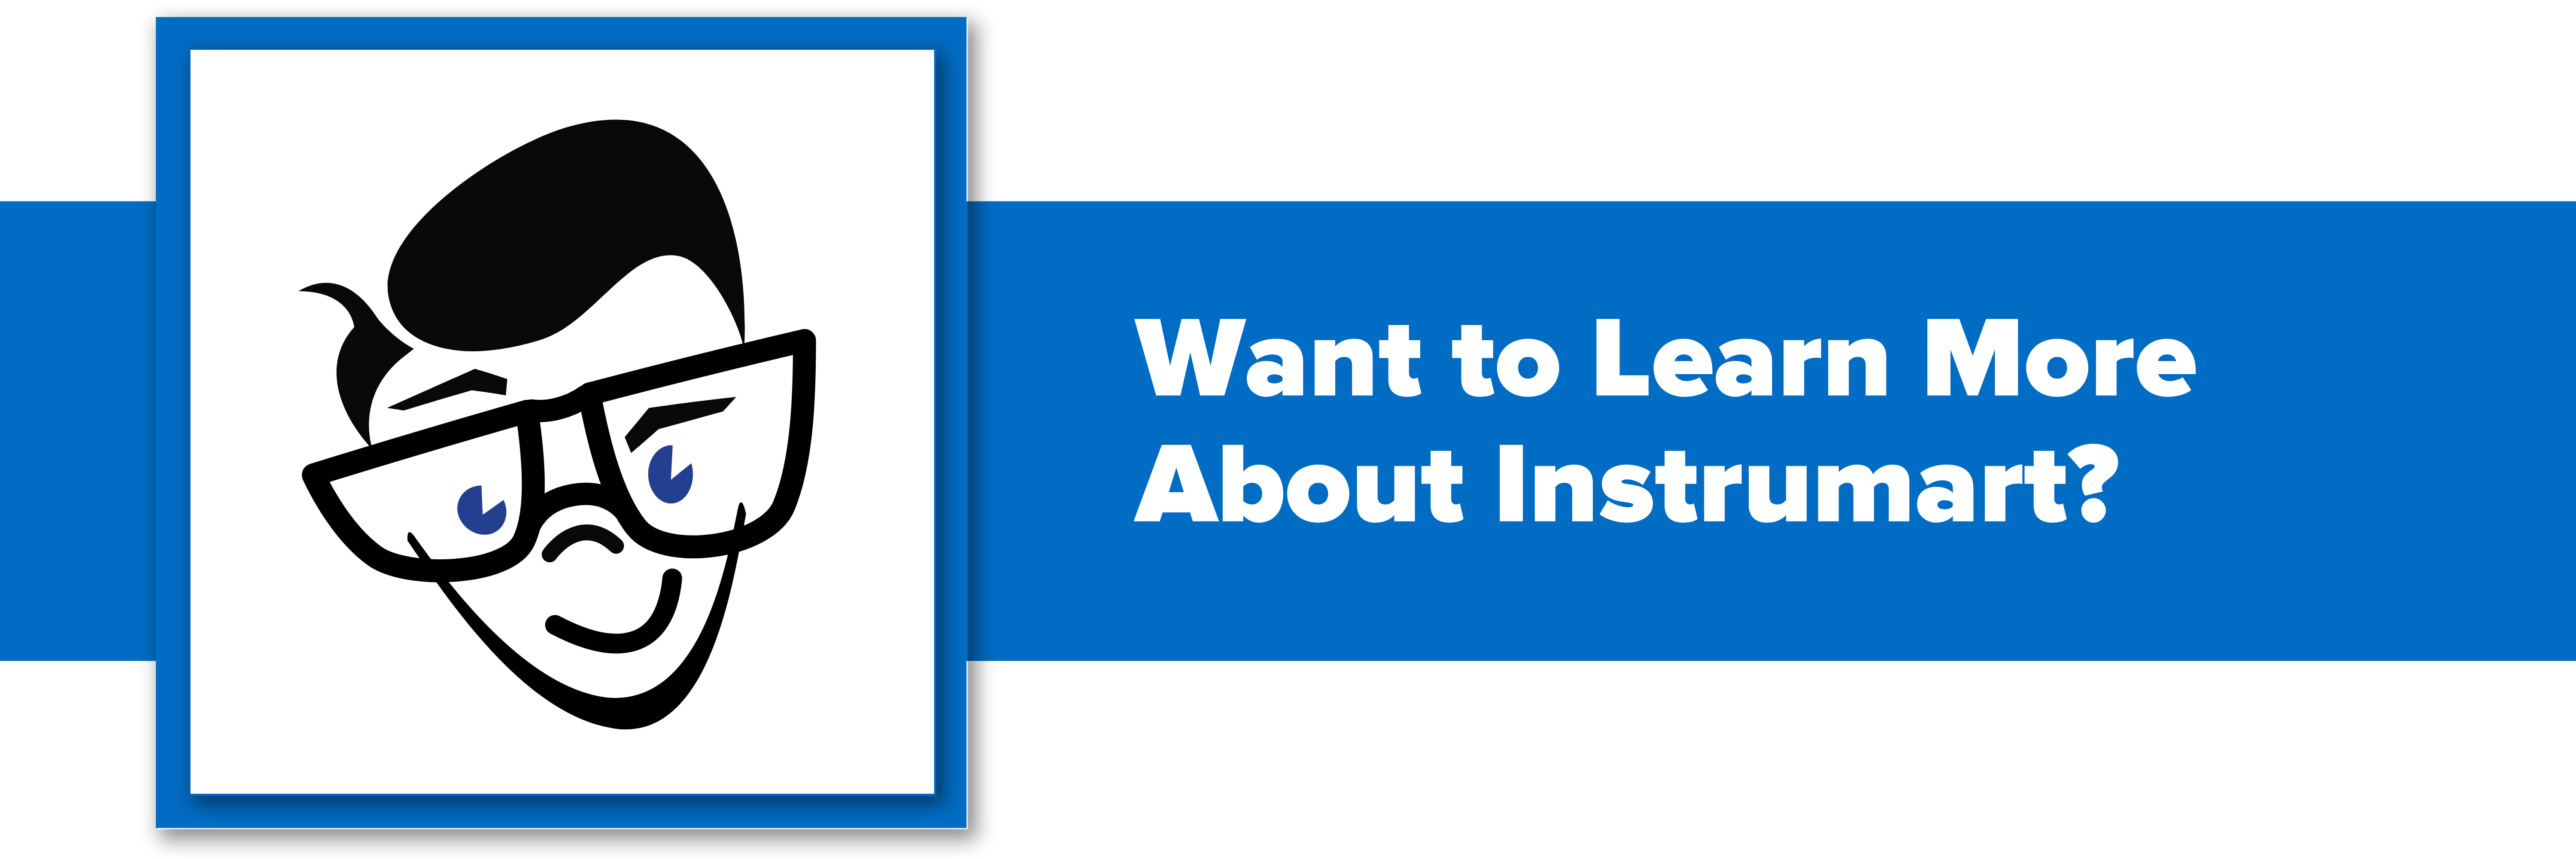 Header image with text "Want to Learn More About Instrumart?"